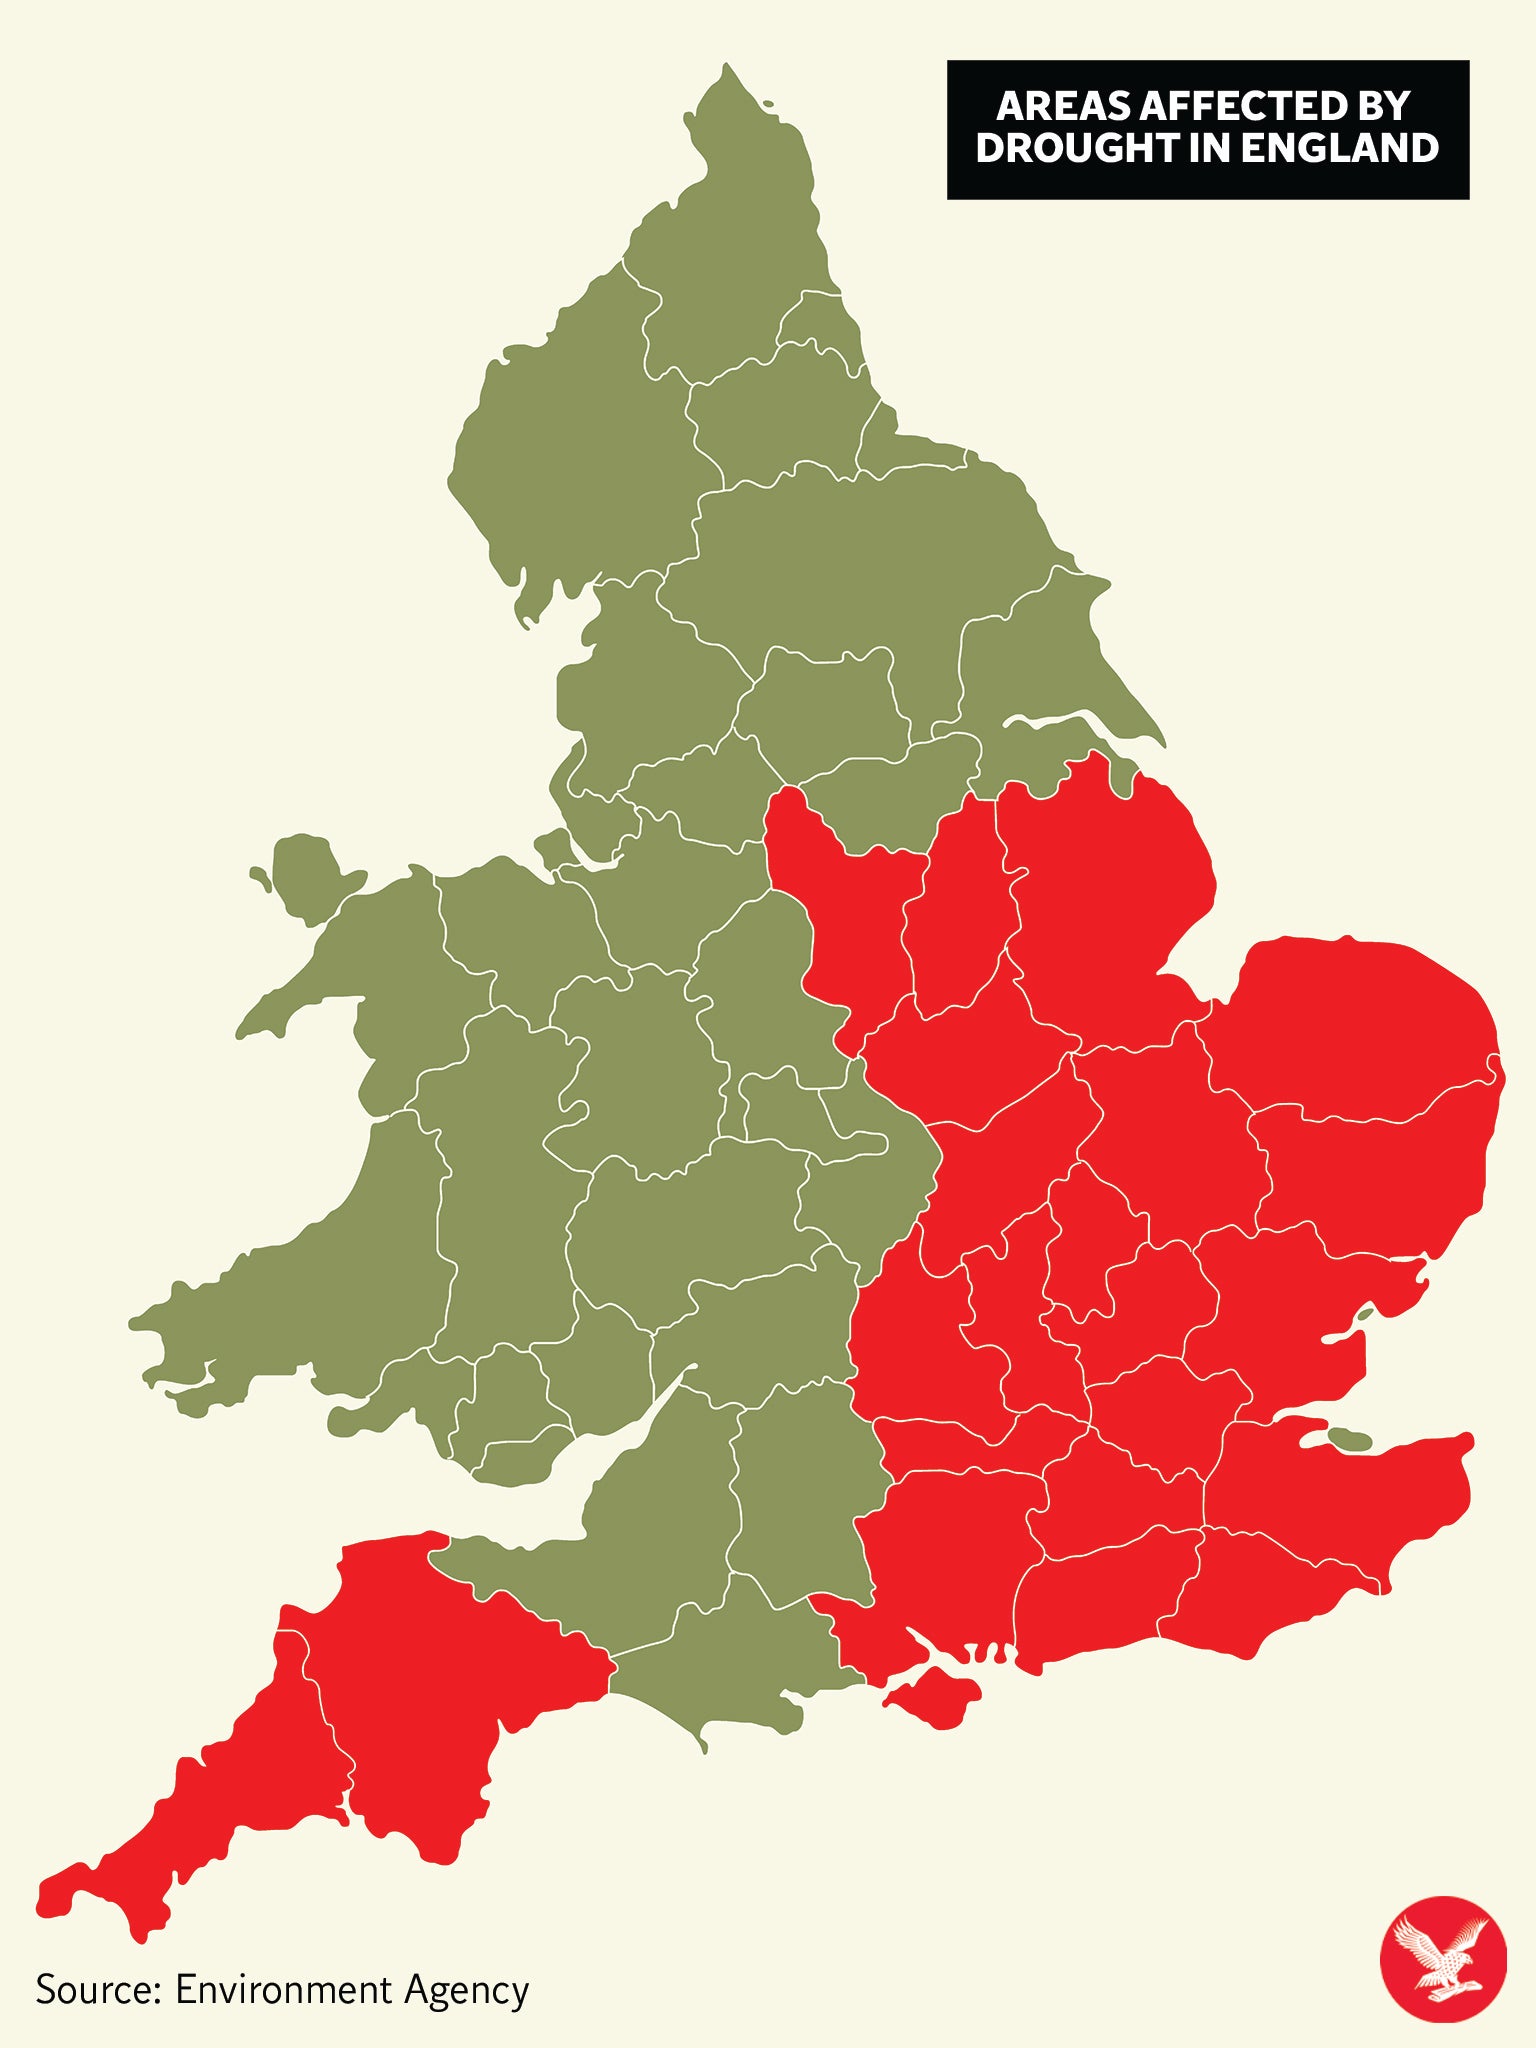 The EA confirmed drought status of several areas in England